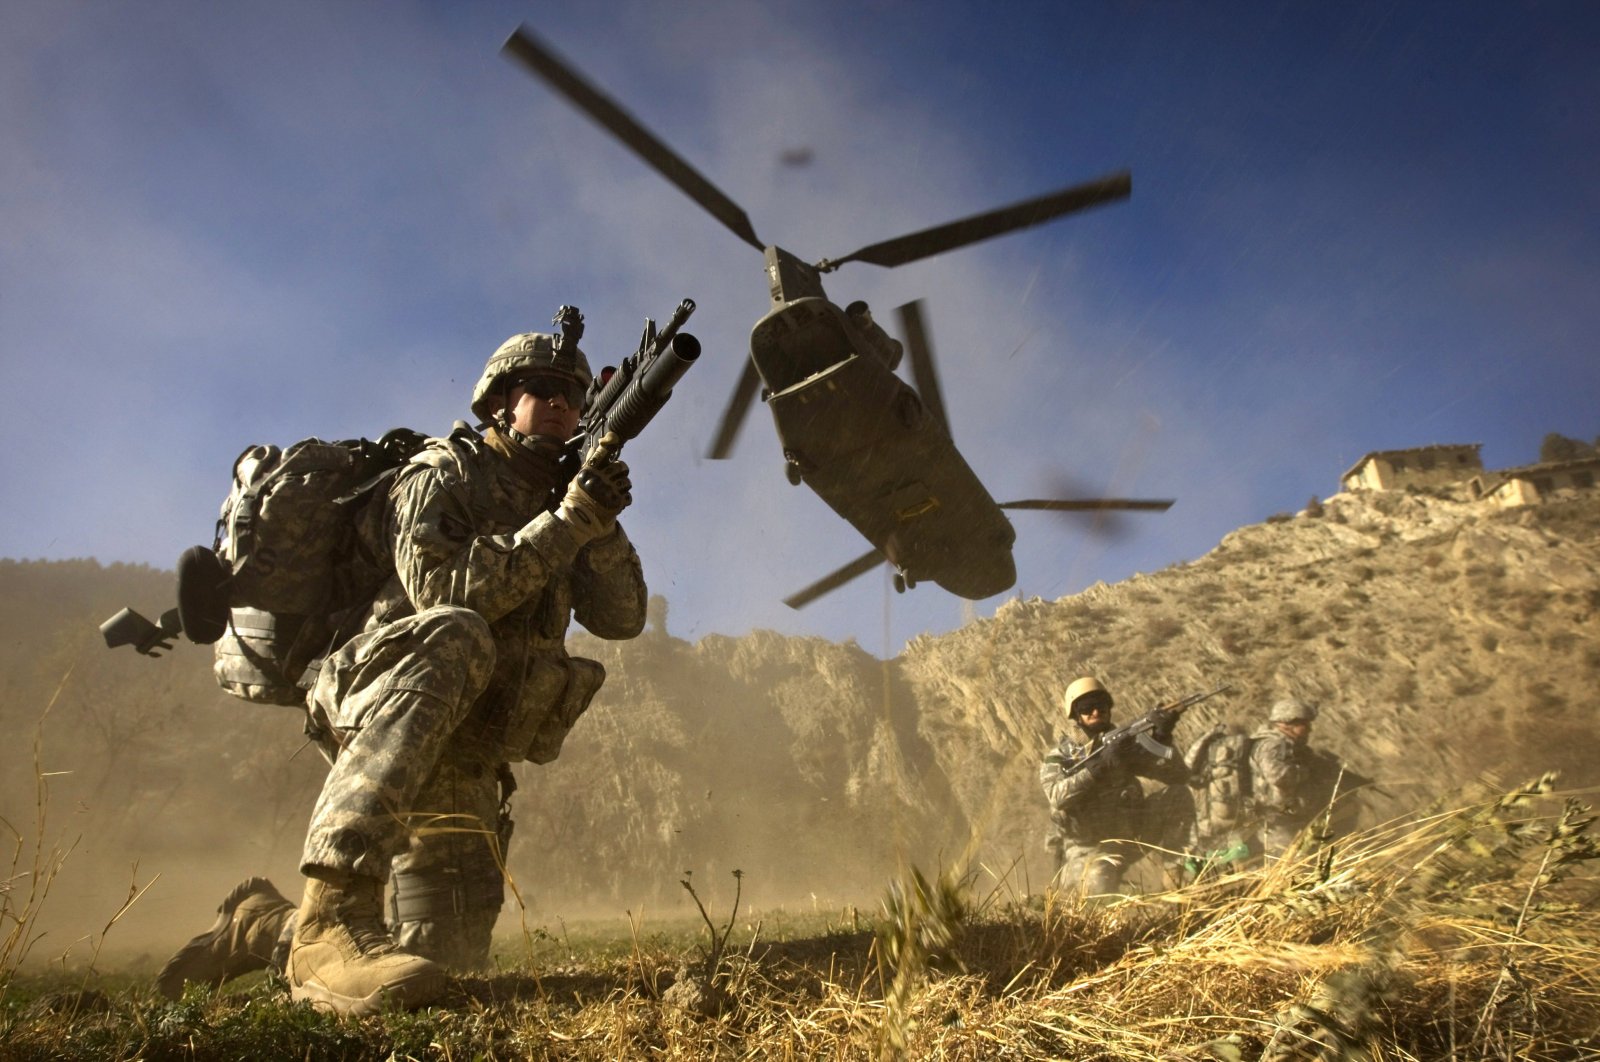 This file photo taken on November 20, 2008 shows US Army soldiers from 2-506 Infantry 101st Airborne Division and Afghan National Army soldiers taking positions after racing off the back of a UH-47 Chinook helicopter during the launch of Operation Shir Pacha into the Derezda Valley in the rugged Spira mountains in Khost province, along the Afghan-Pakistan Border, directly across the border from Pakistan's Waziristan region. (AFP Photo)